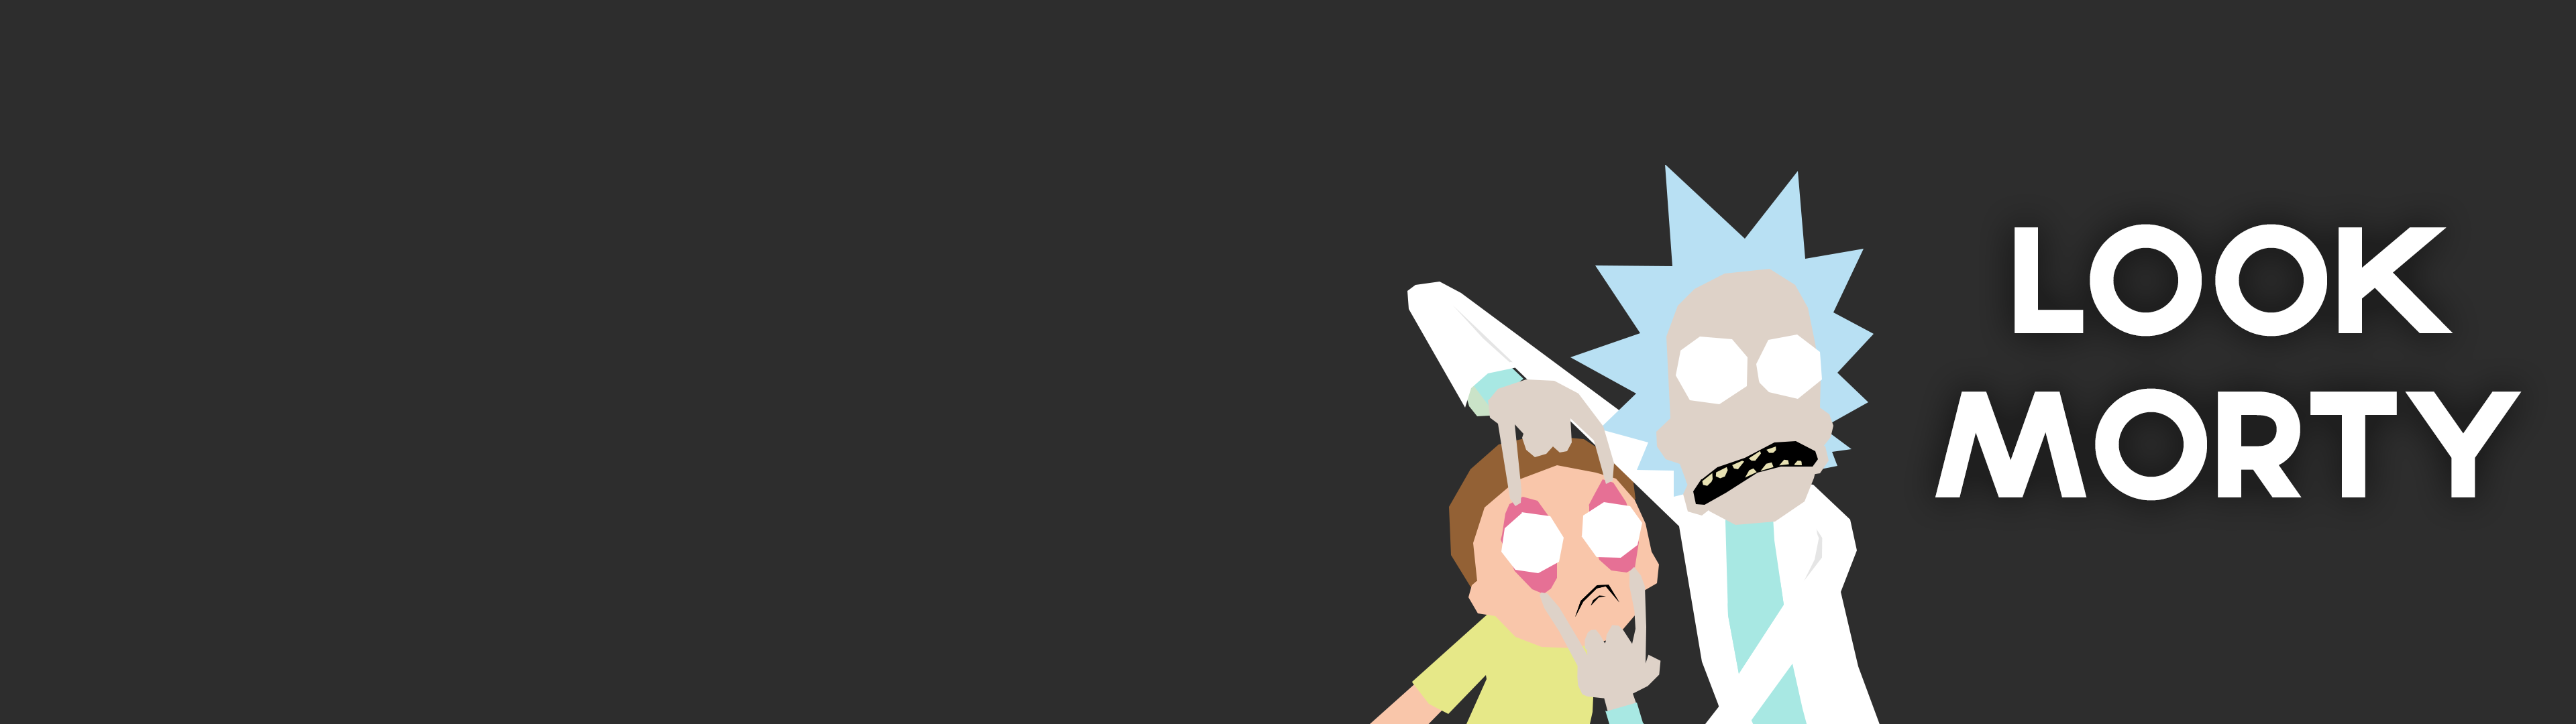 Share 56 rick and morty breaking bad wallpaper best  incdgdbentre